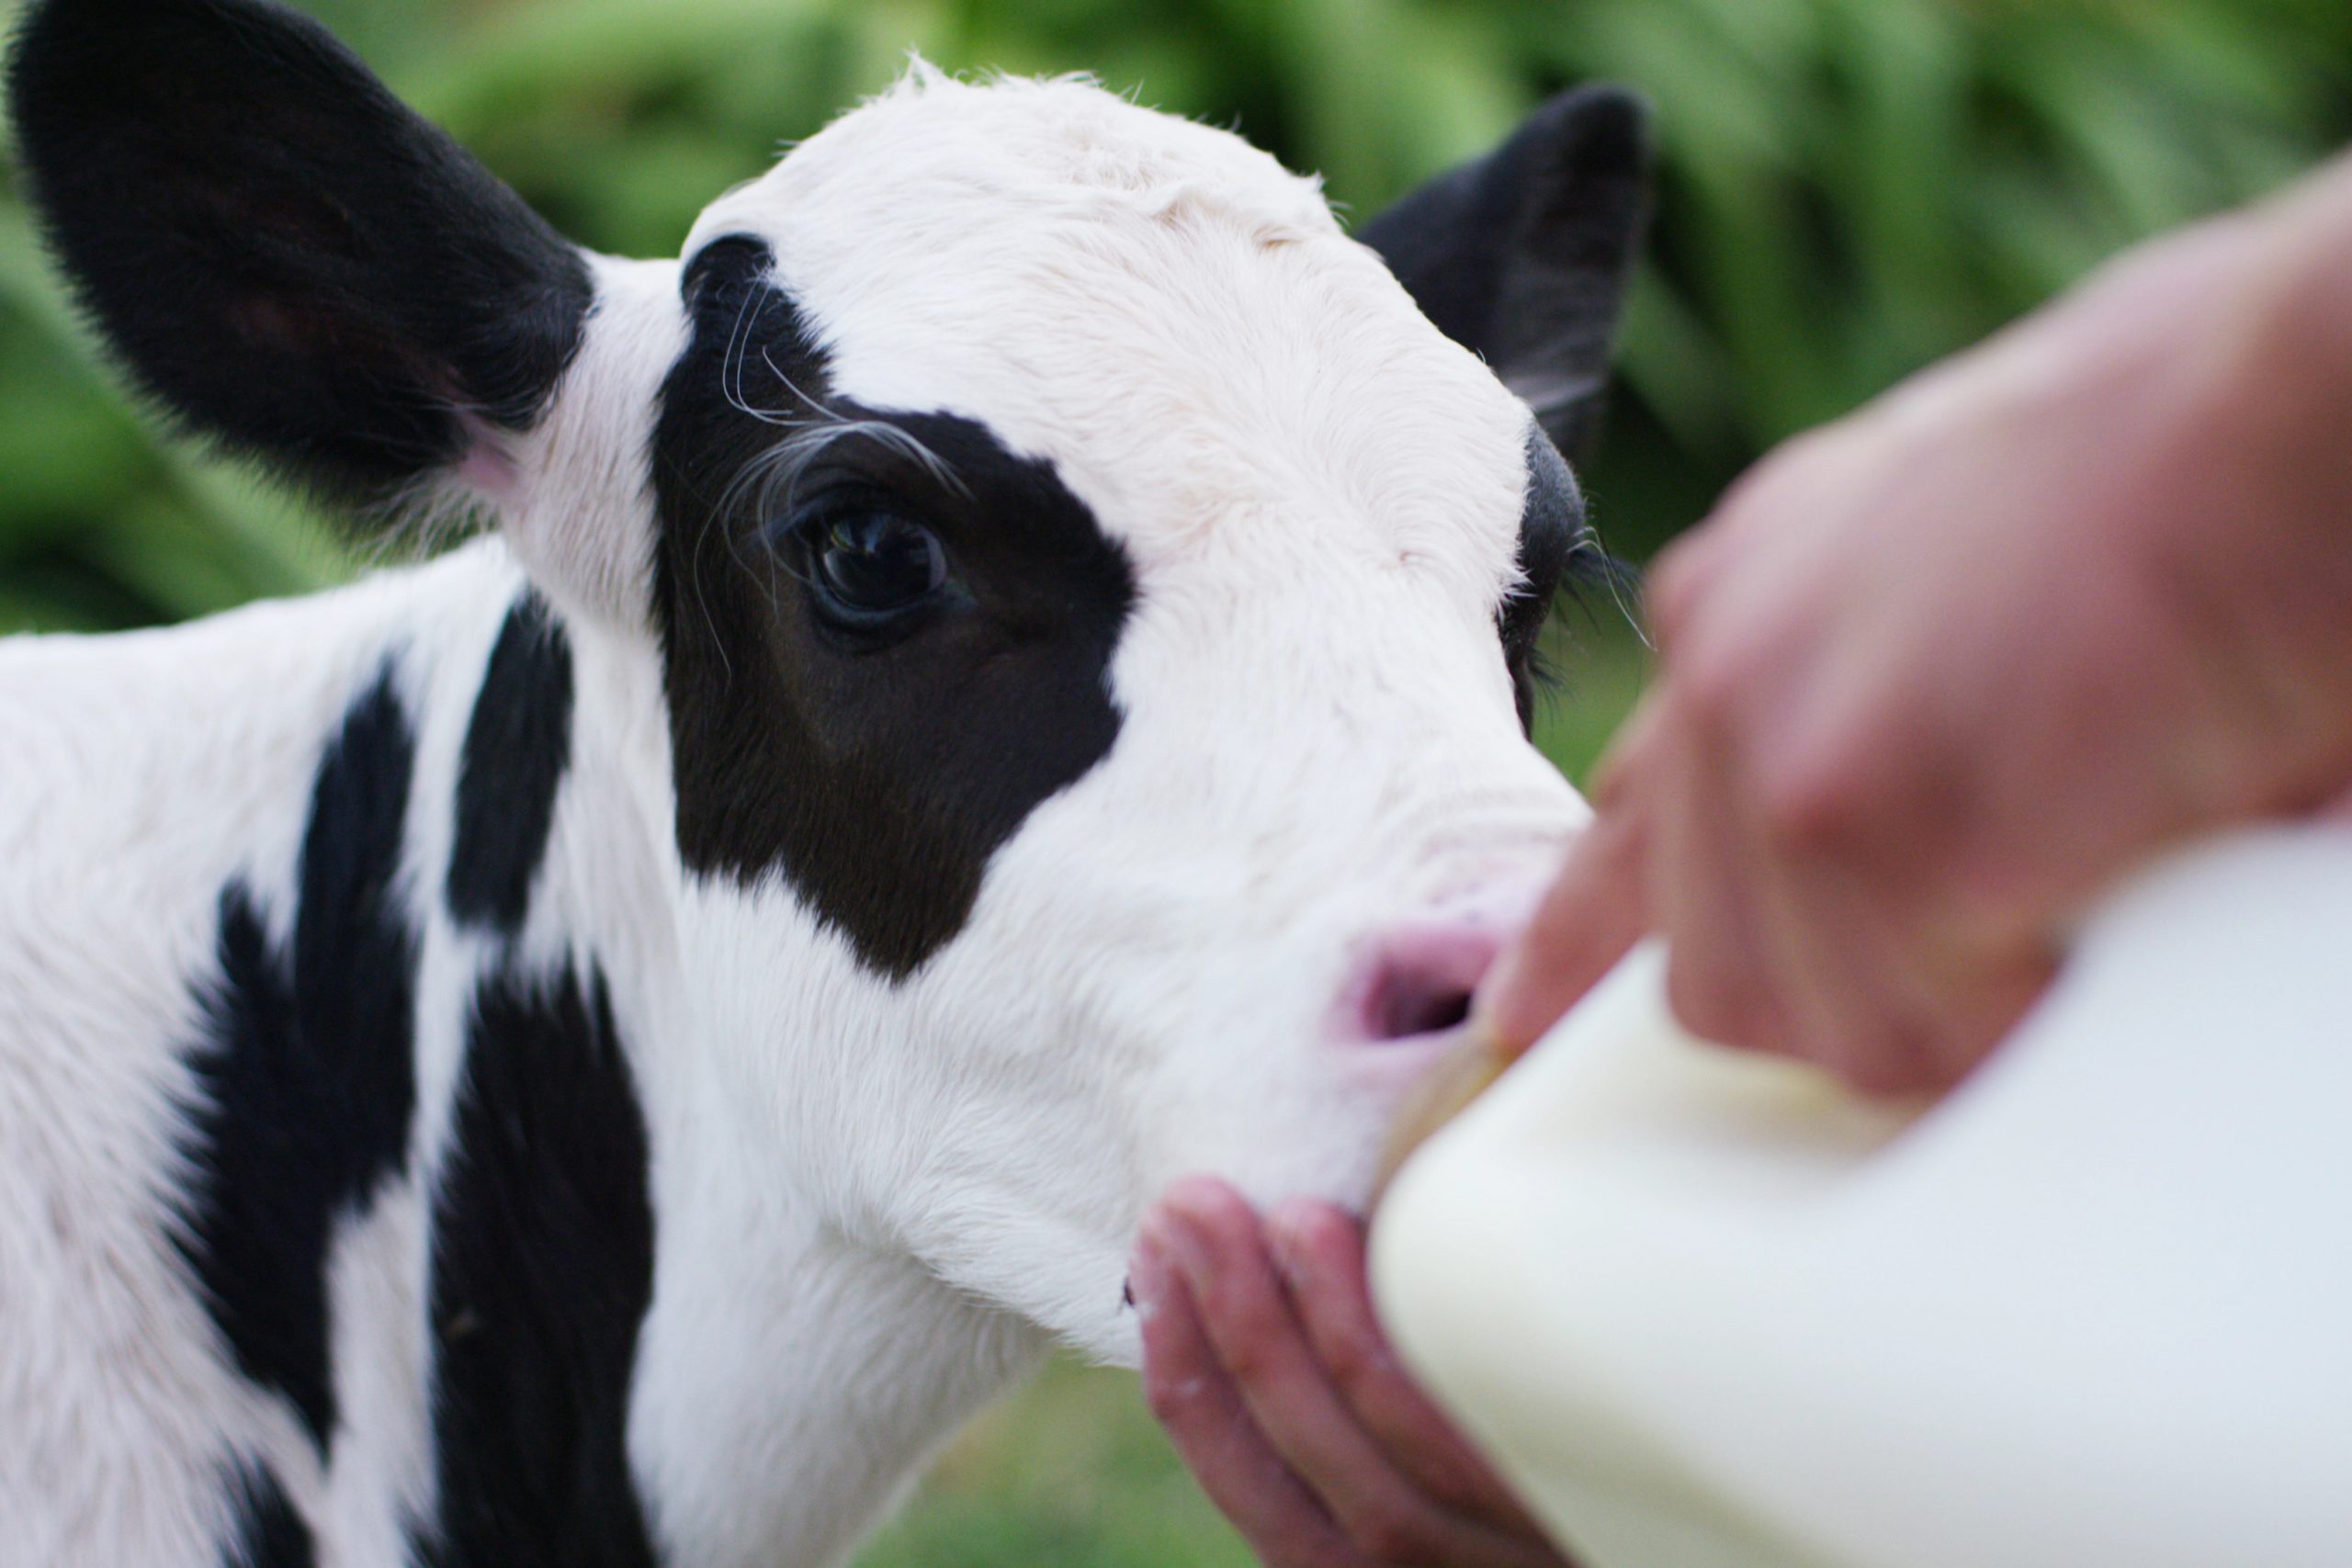 Feeding calves can be more cost efficient. Photo: Shutterstock